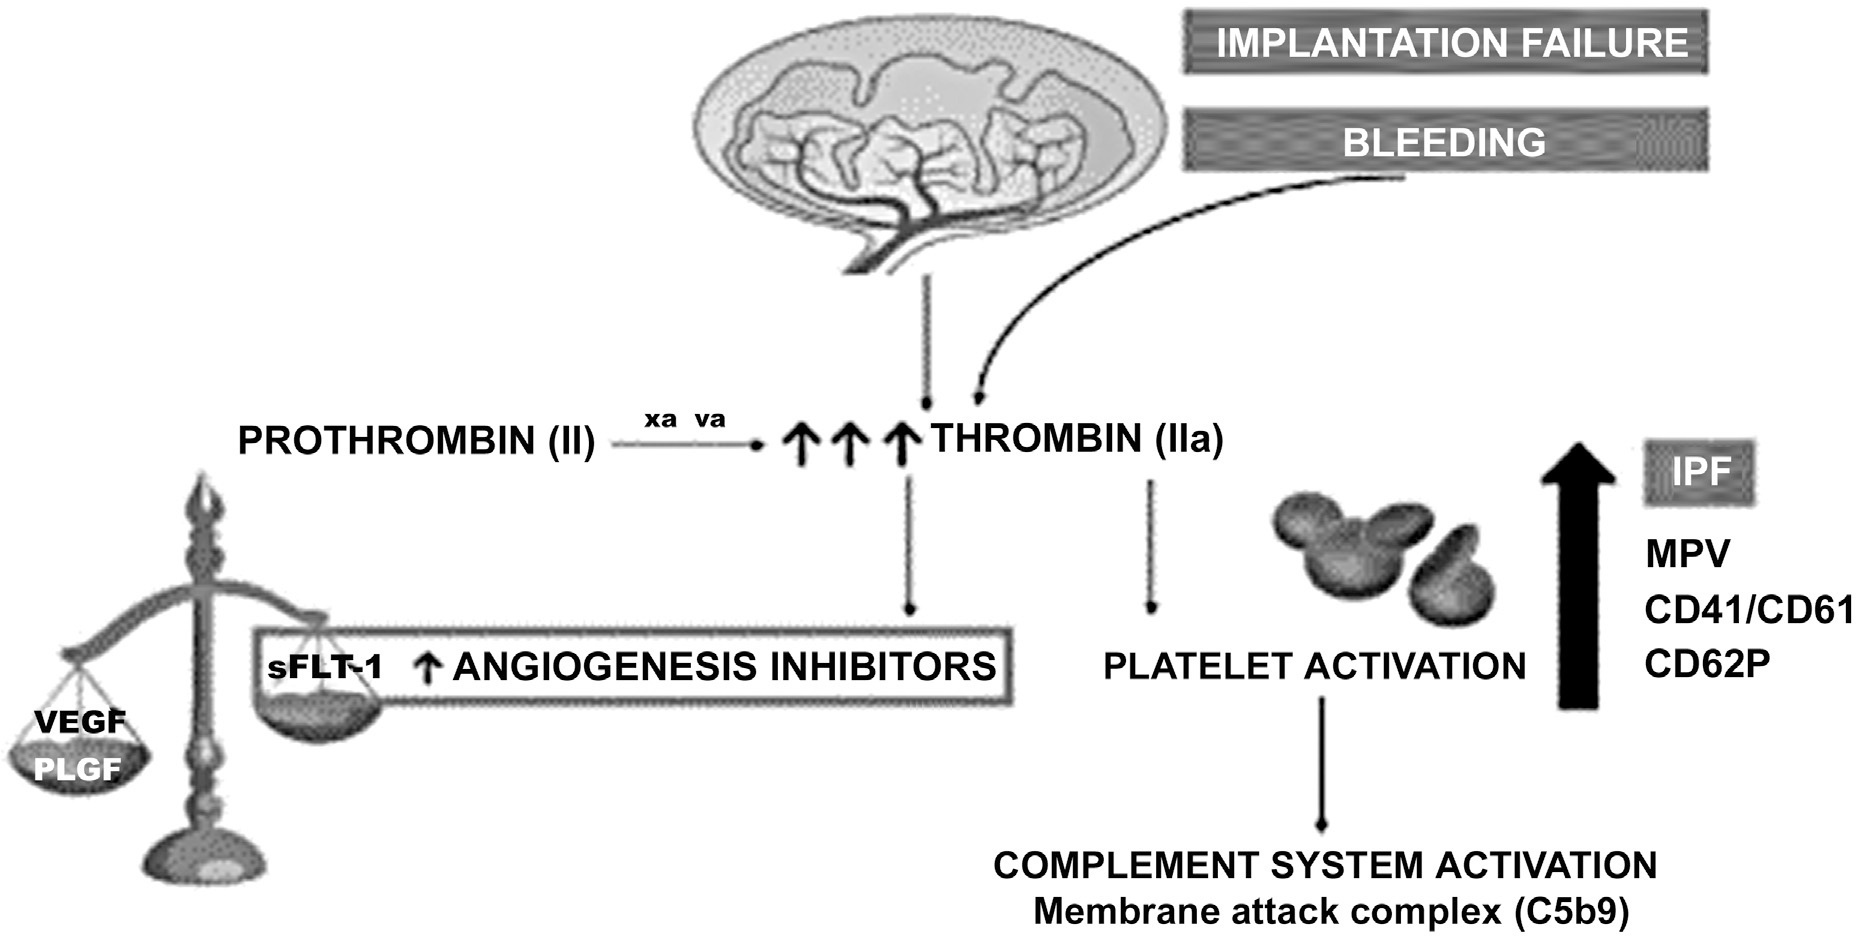 Immature Platelet Fraction and Thrombin Generation: Preeclampsia Biomarkers